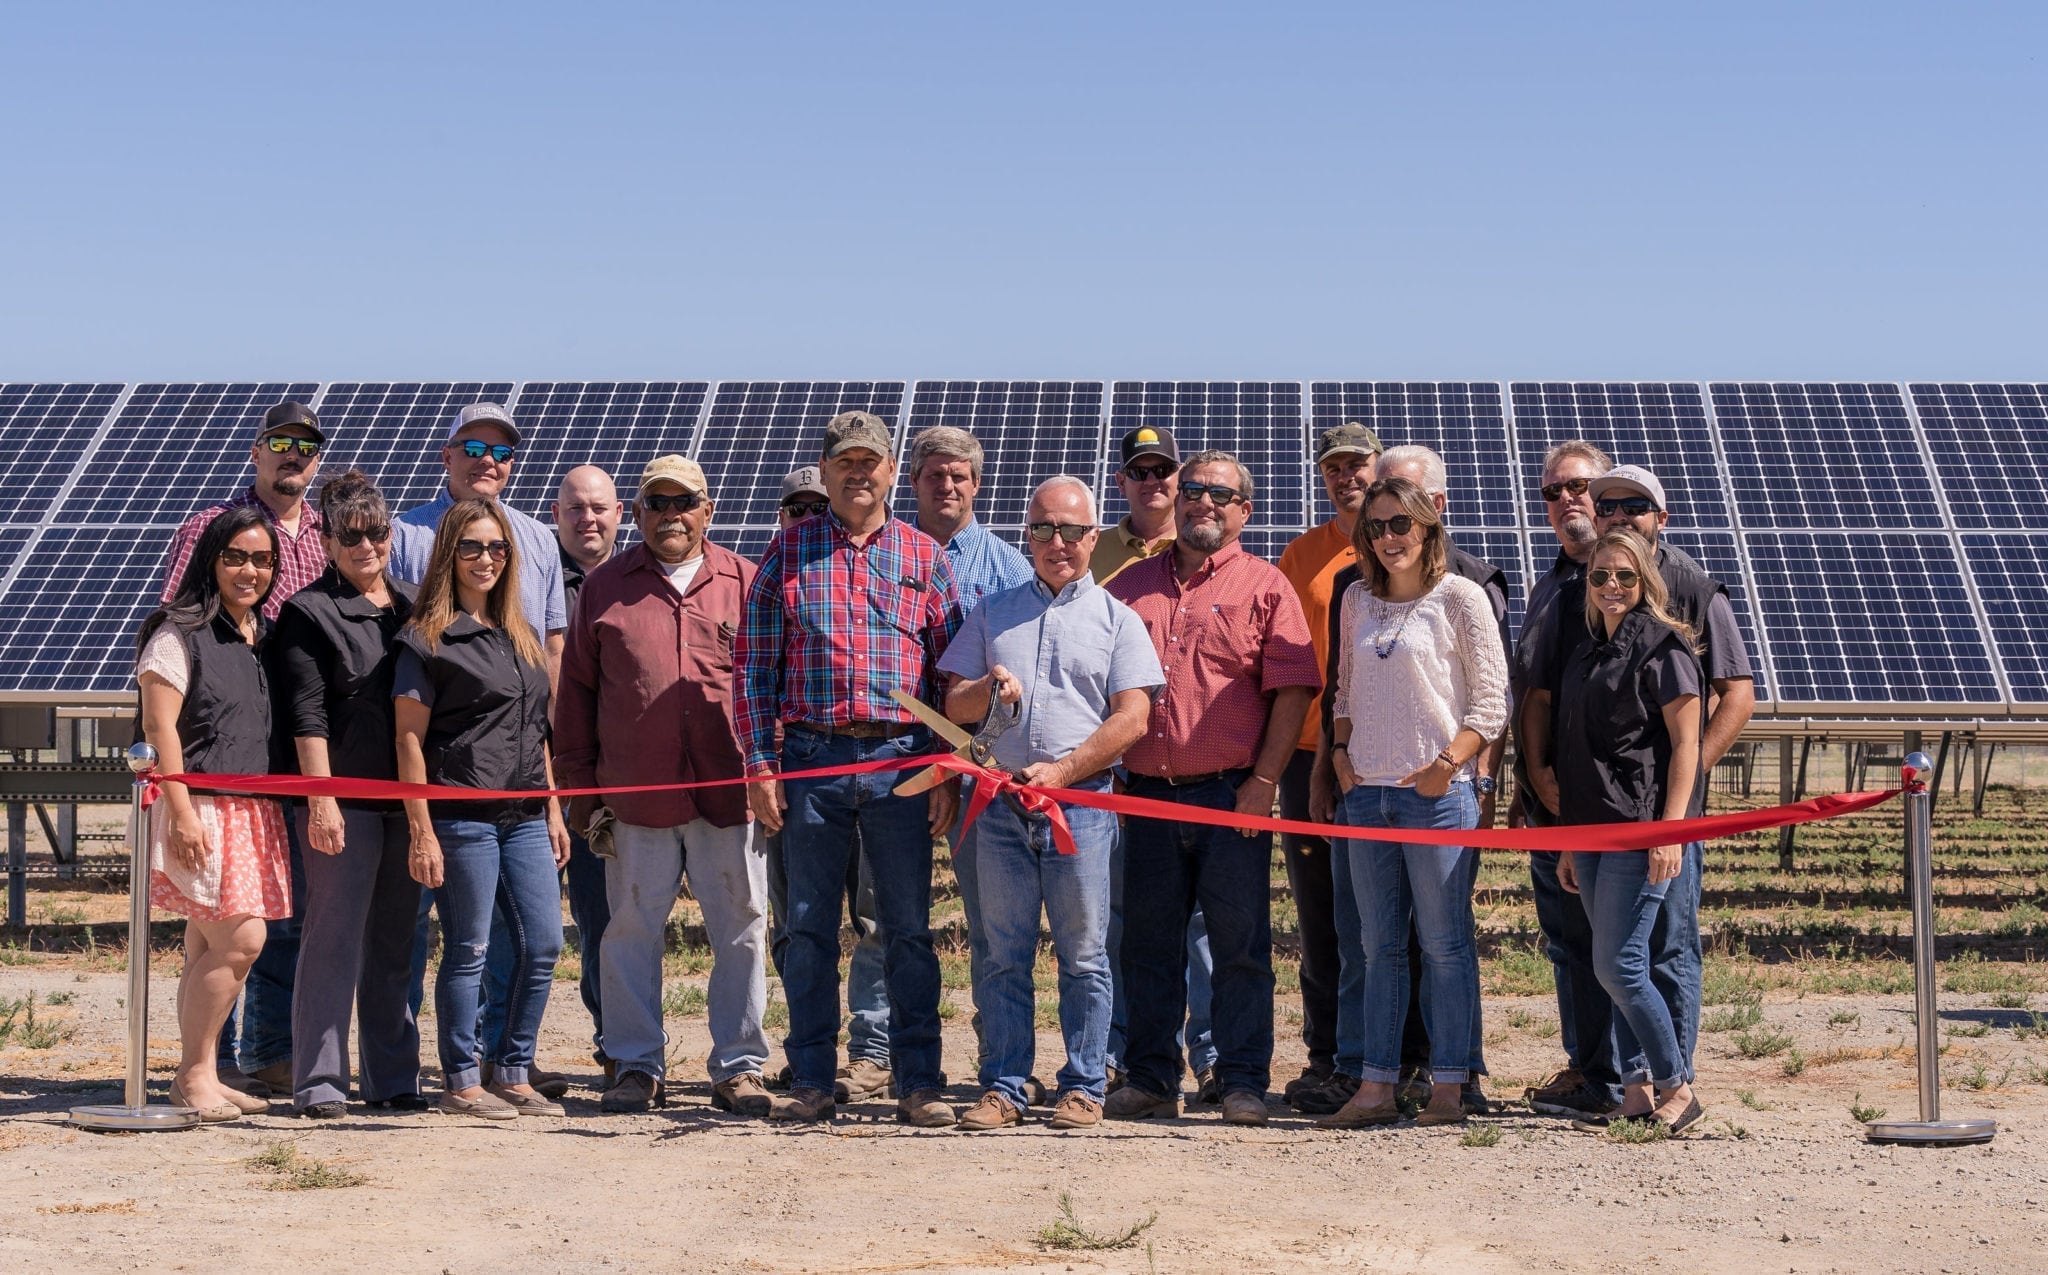 A group of employees from the Sycamore Mutual Water Company in Colusa, California standing at the ribbon cutting ceremony in front of their new solar panels.